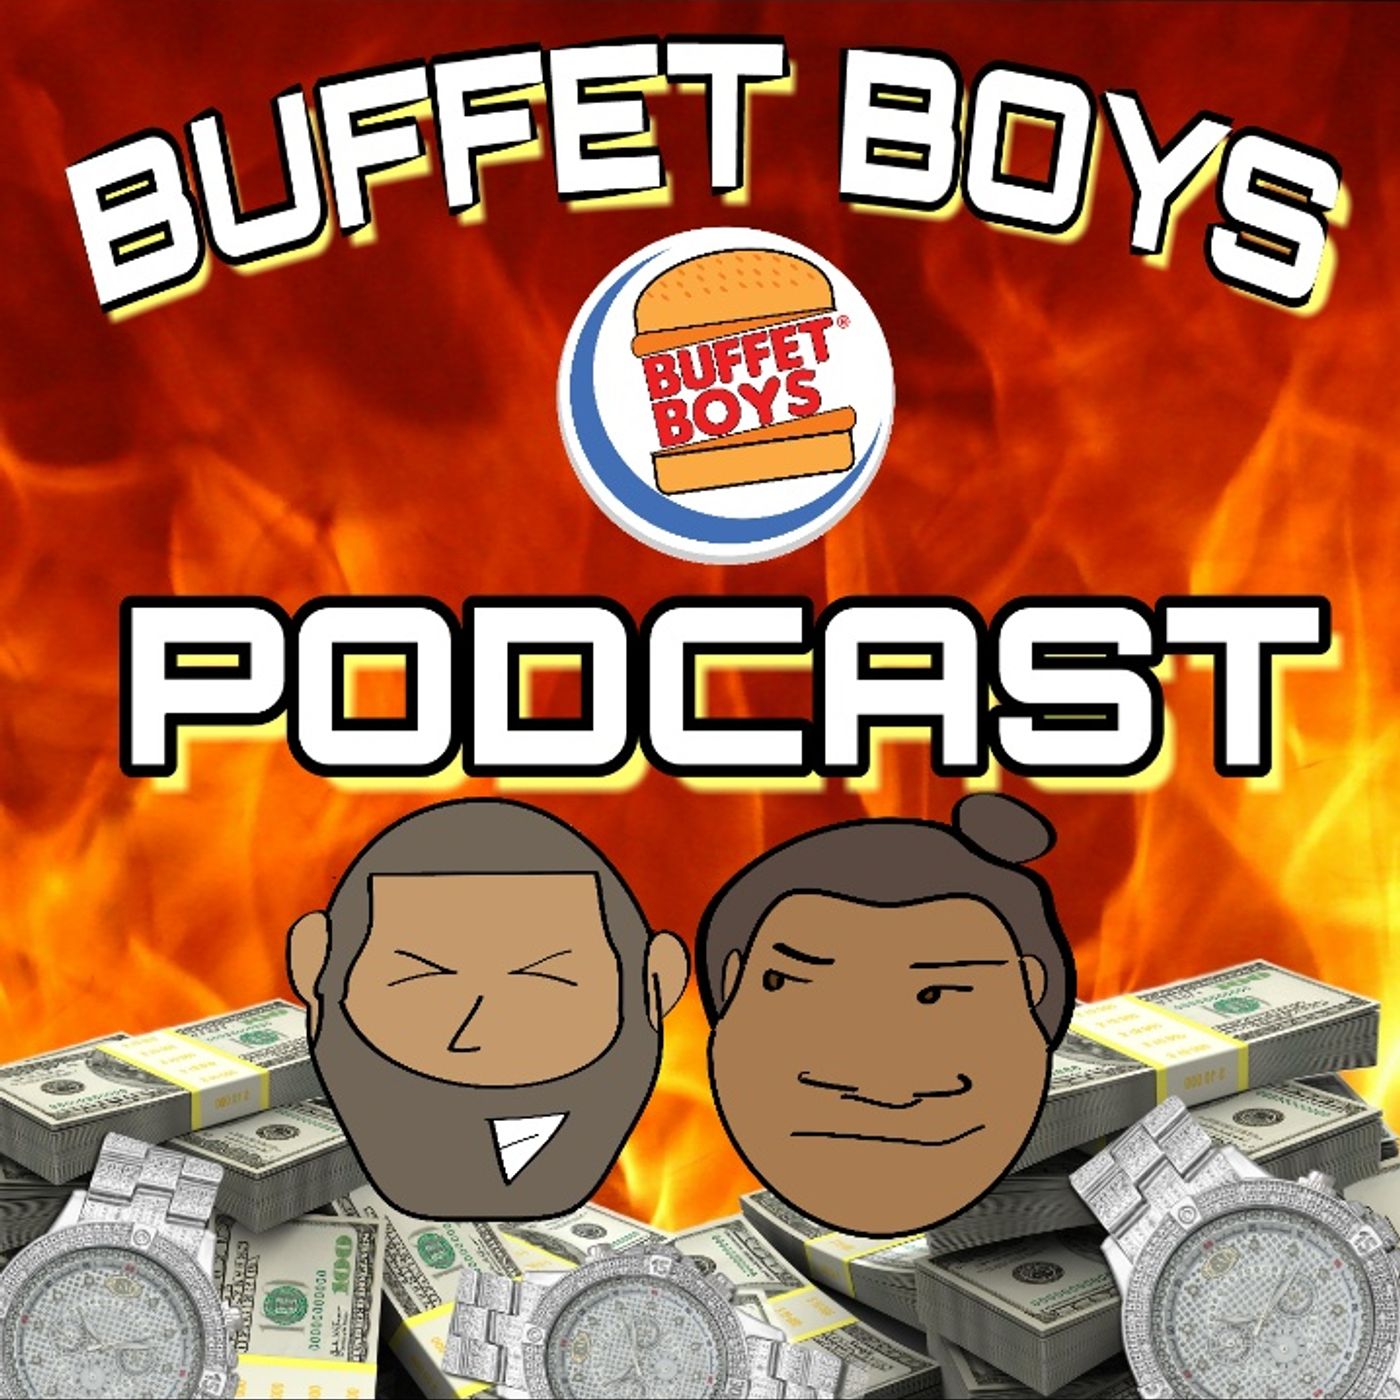 The Buffet Boys Podcast Interview of "Freeway" Rick Ross